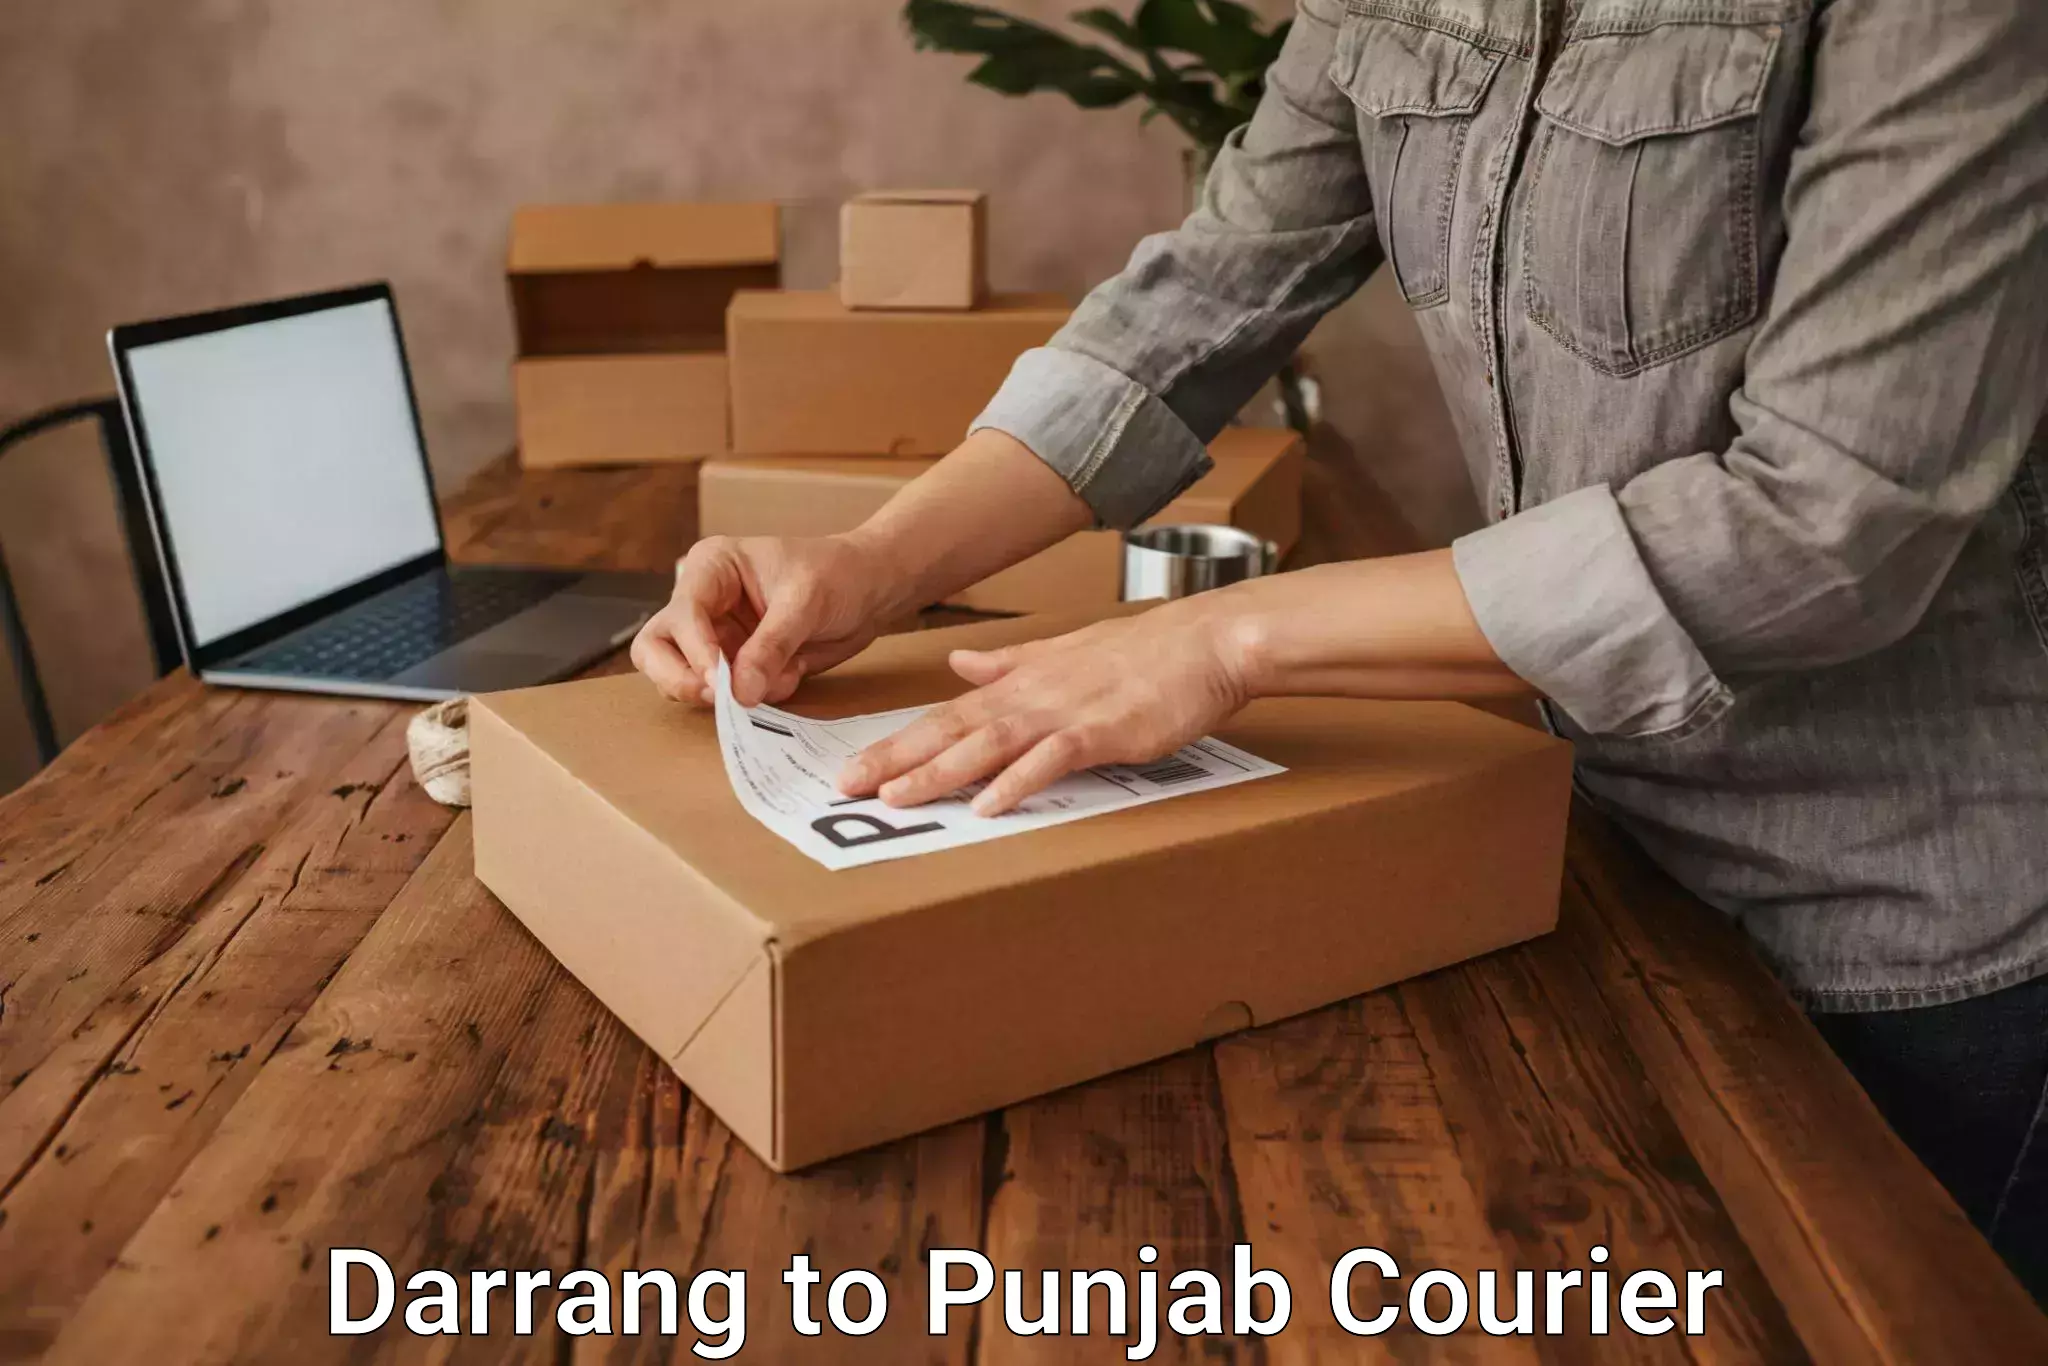 On-call courier service Darrang to Punjab